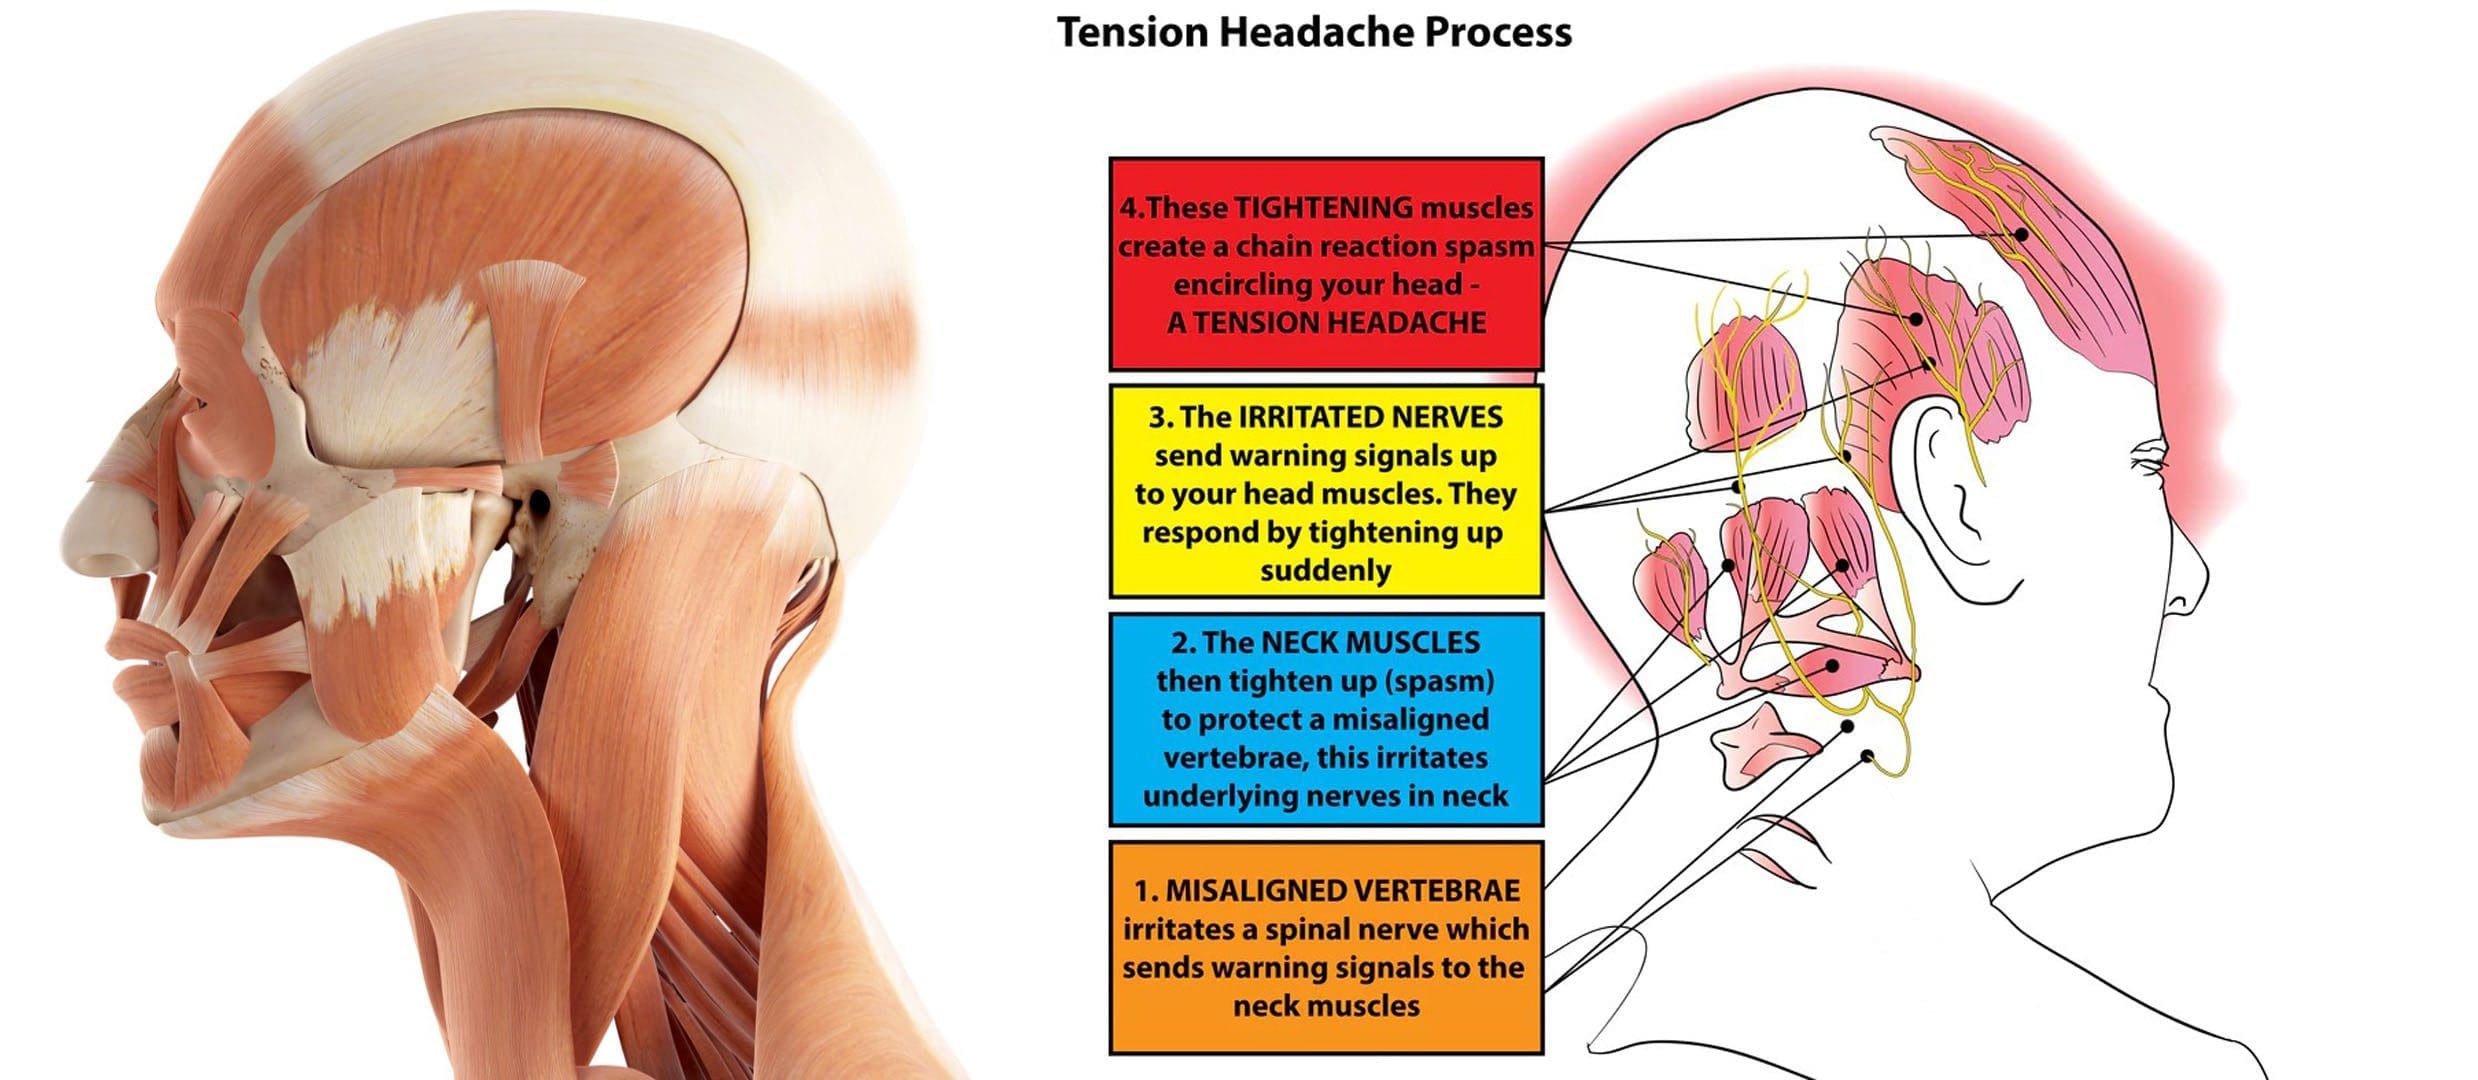 Managing Chronic Tension Headaches: A Step-by-Step Guide